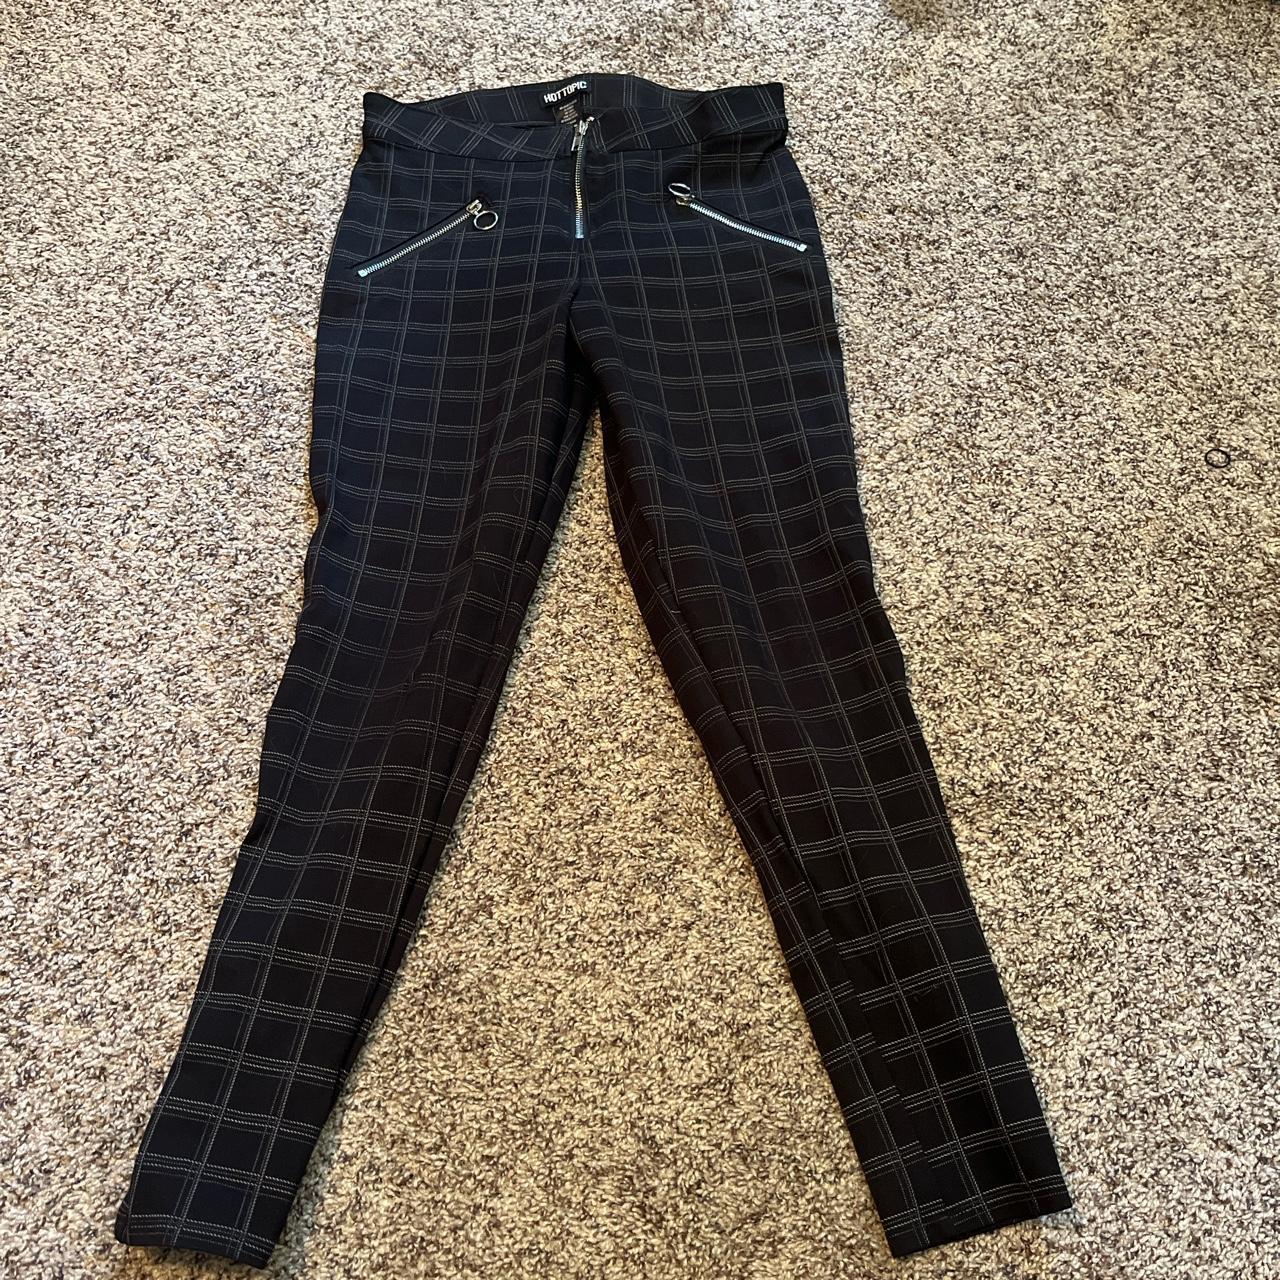 Hot topic black plaid pants. Size small #hottopic - Depop